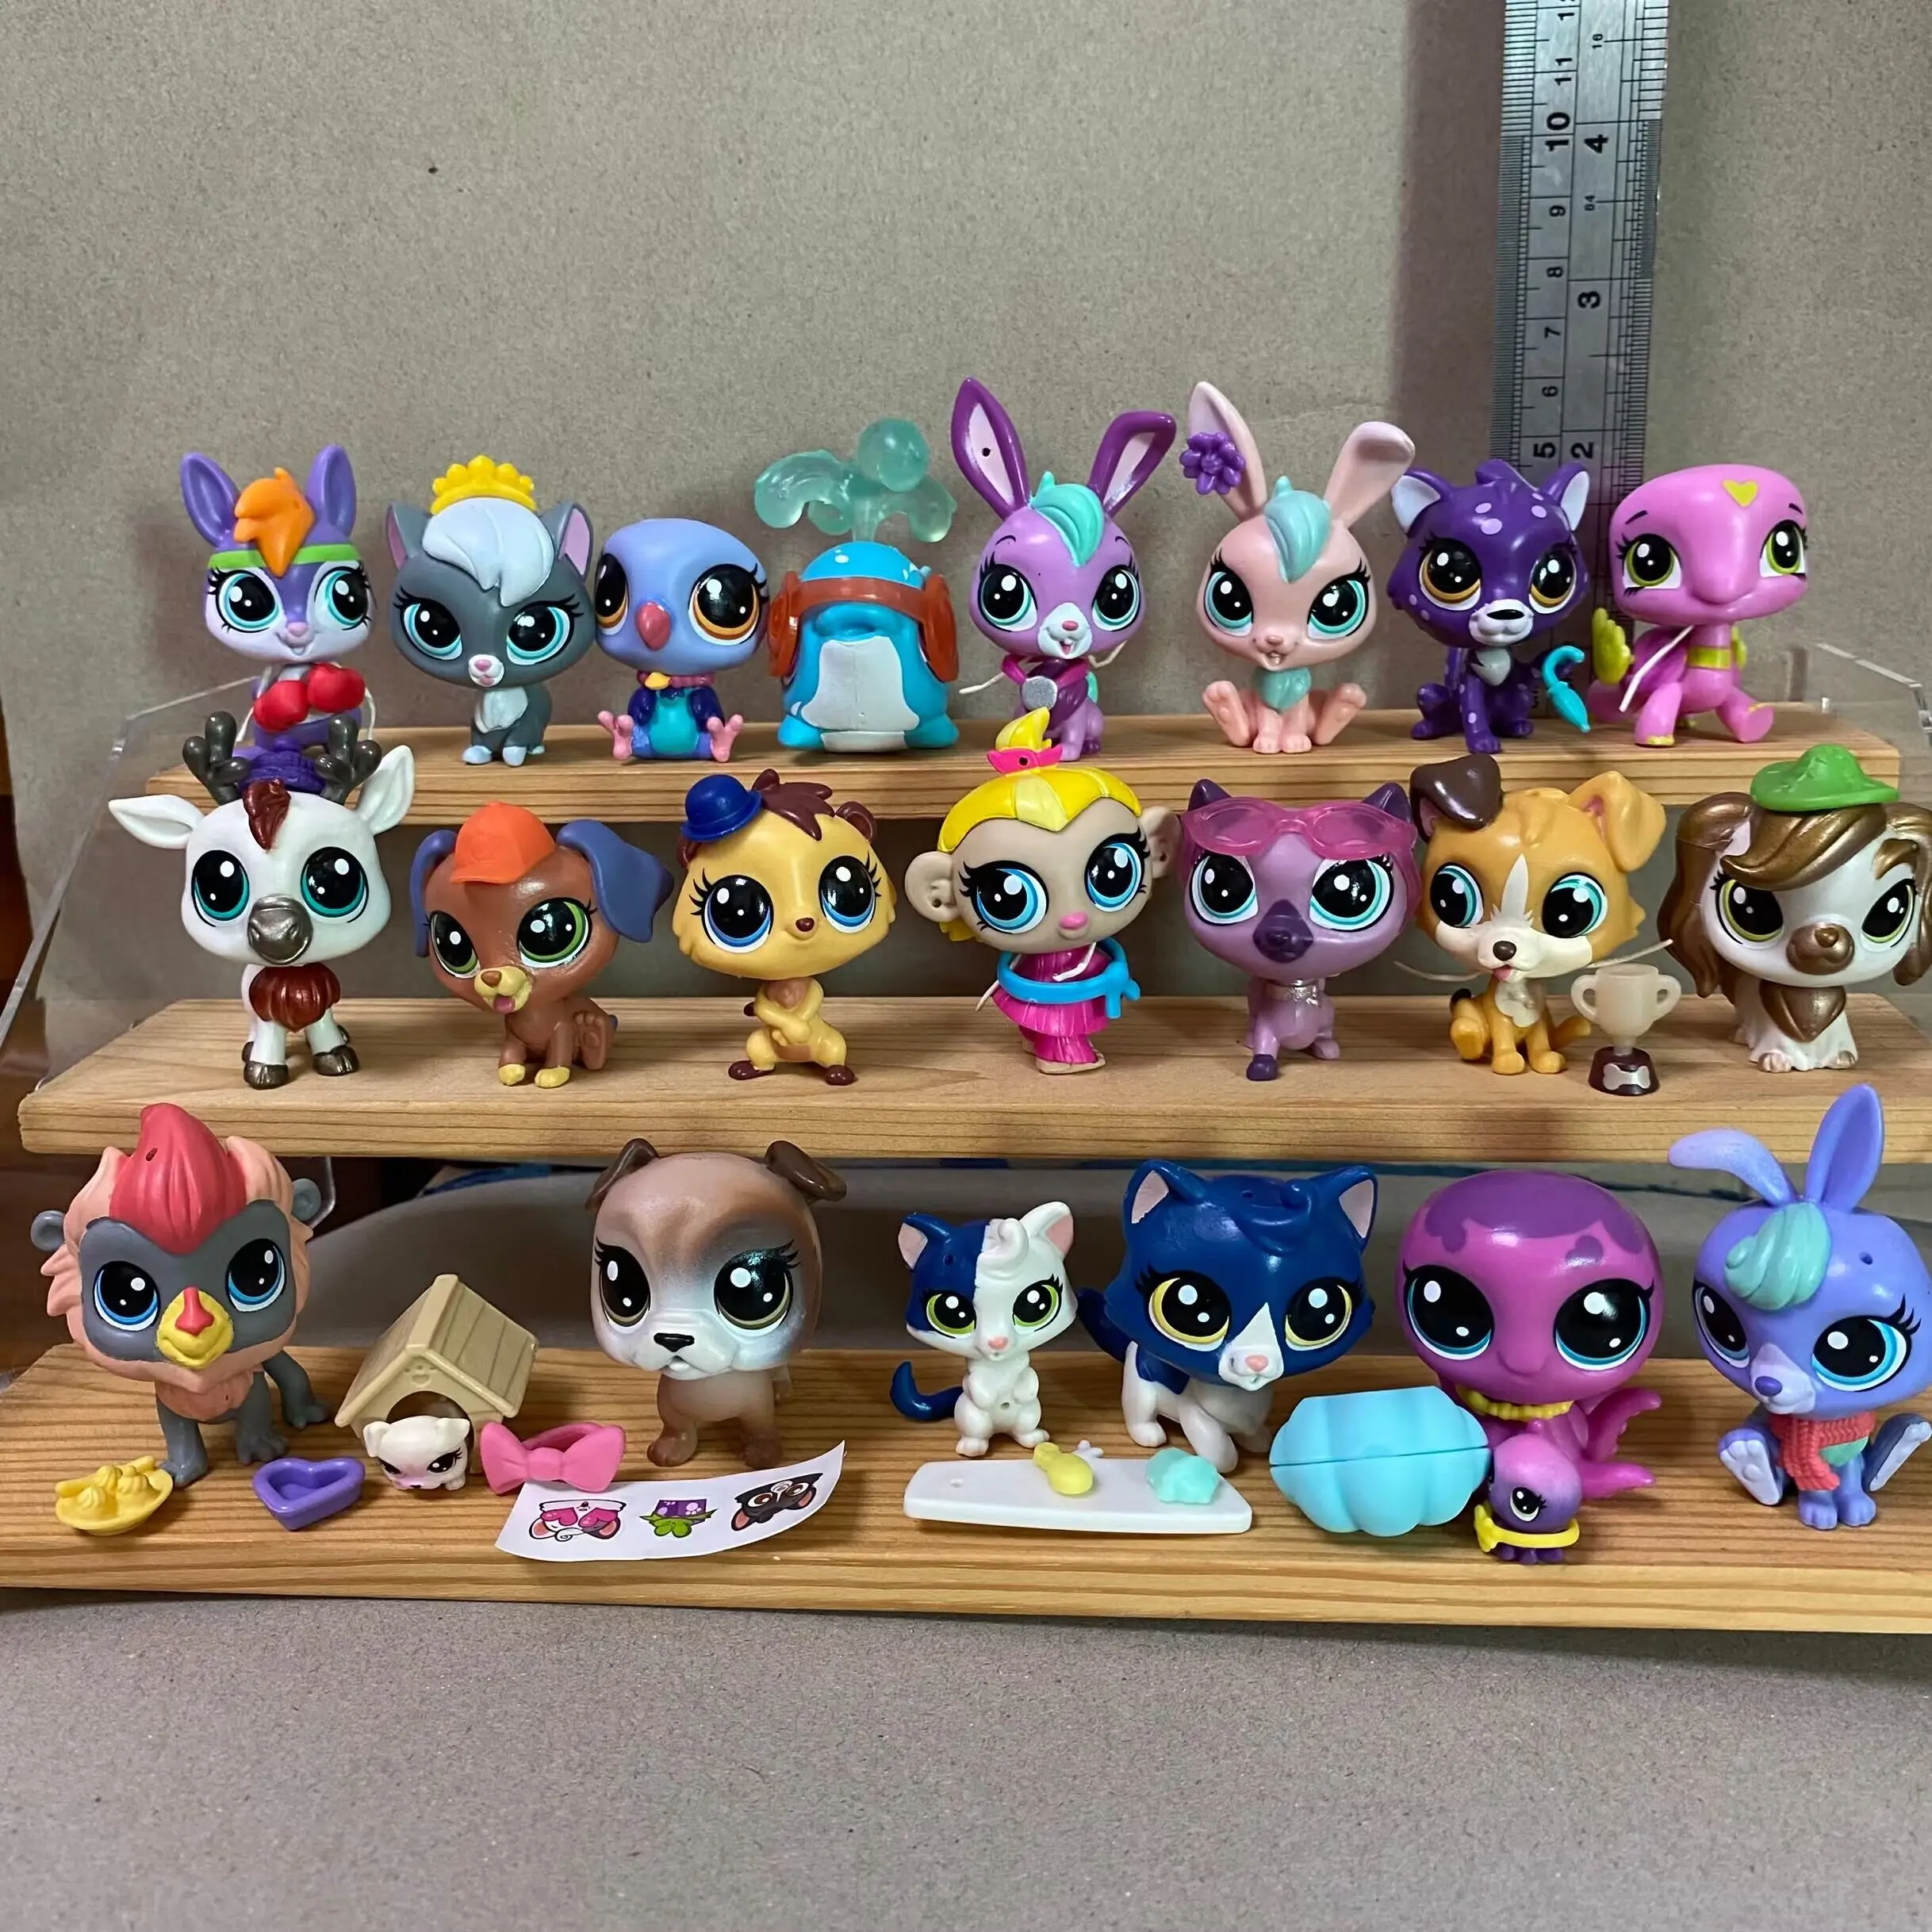 https://ae01.alicdn.com/kf/S490d8d7d6968471ba0a836bdfc1759c3Y/LOT-OF-20PCS-2inch-Littlest-pet-shop-LPS-Cute-the-cat-dog-Animals-Christmas-toy-gift.jpg